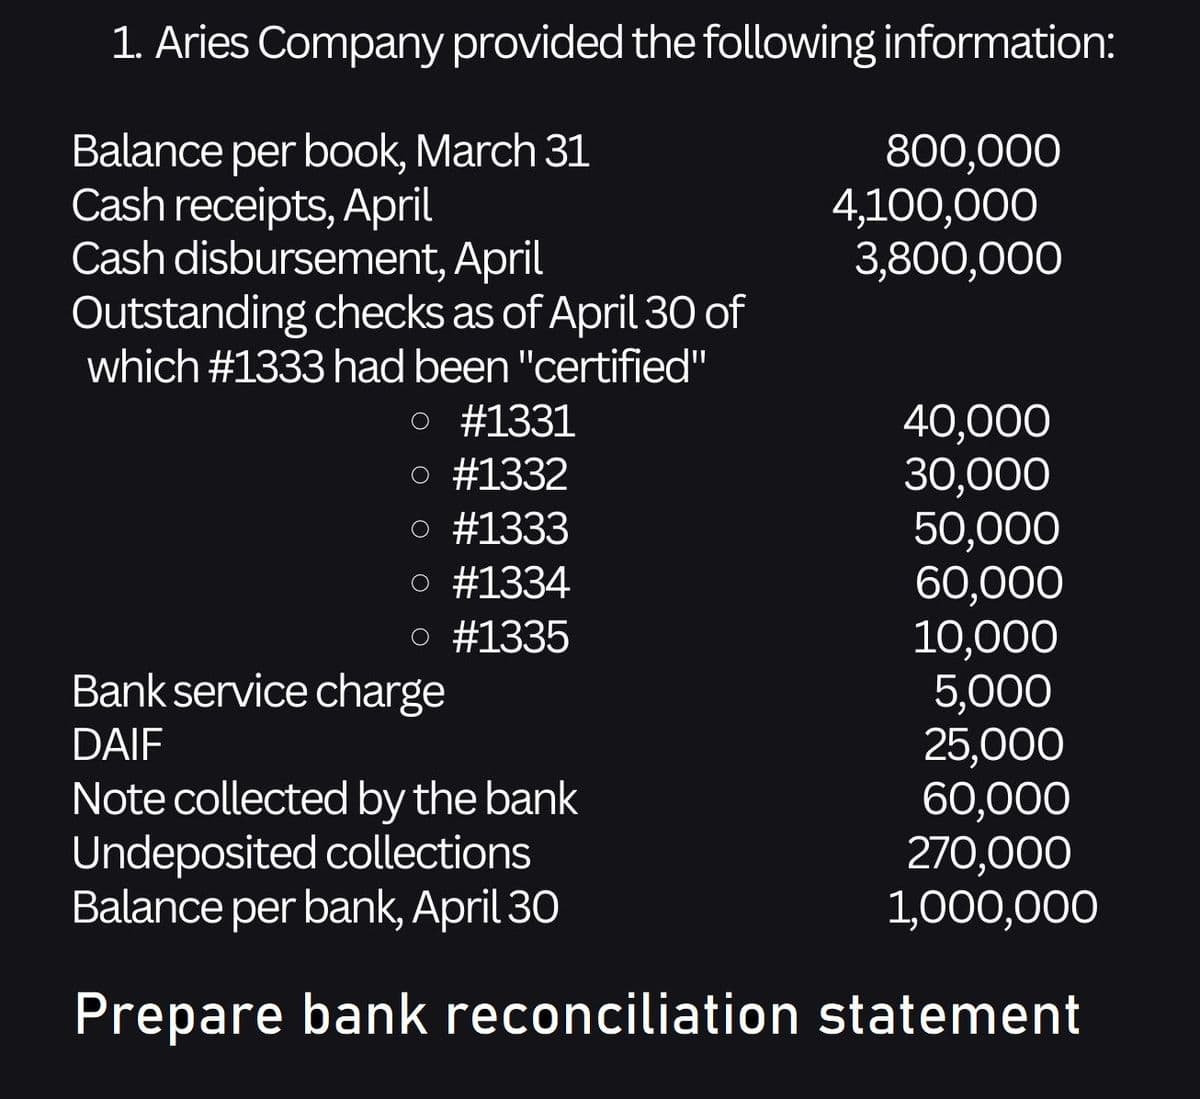 1. Aries Company provided the following information:
800,000
Balance per book, March 31
Cash receipts, April
Cash disbursement, April
Outstanding checks as of April 30 of
which #1333 had been "certified"
○ #1331
o #1332
o #1333
o #1334
o #1335
Bank service charge
DAIF
Note collected by the bank
Undeposited collections
Balance per bank, April 30
Prepare bank reconciliation
4,100,000
3,800,000
40,000
30,000
50,000
60,000
10,000
5,000
25,000
60,000
270,000
1,000,000
statement